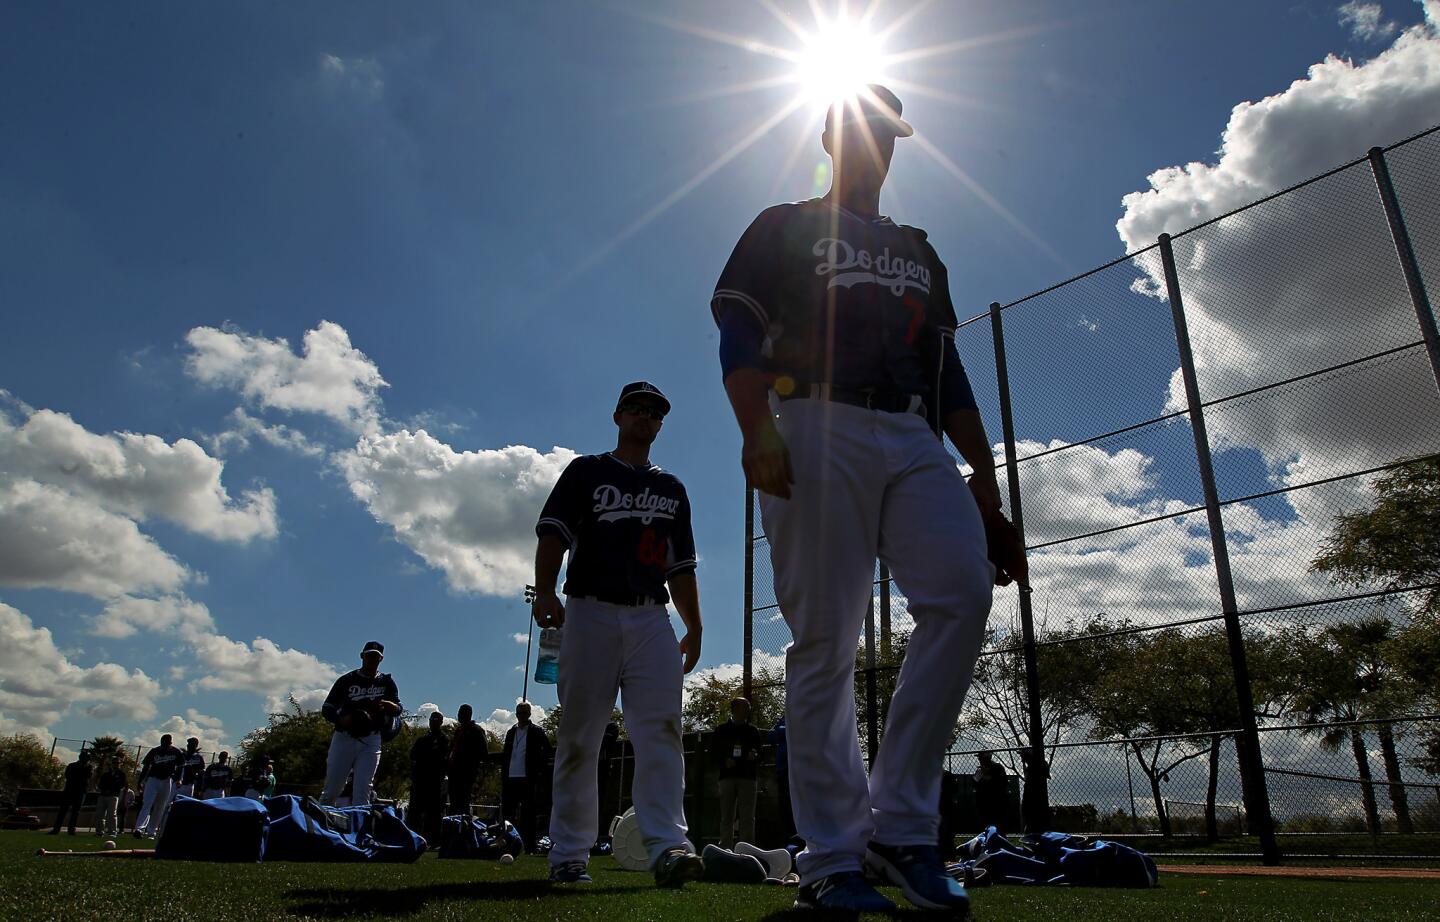 Dodgers players take the field for a workout on March 3 at Camelback Ranch in Glendale, Ariz.